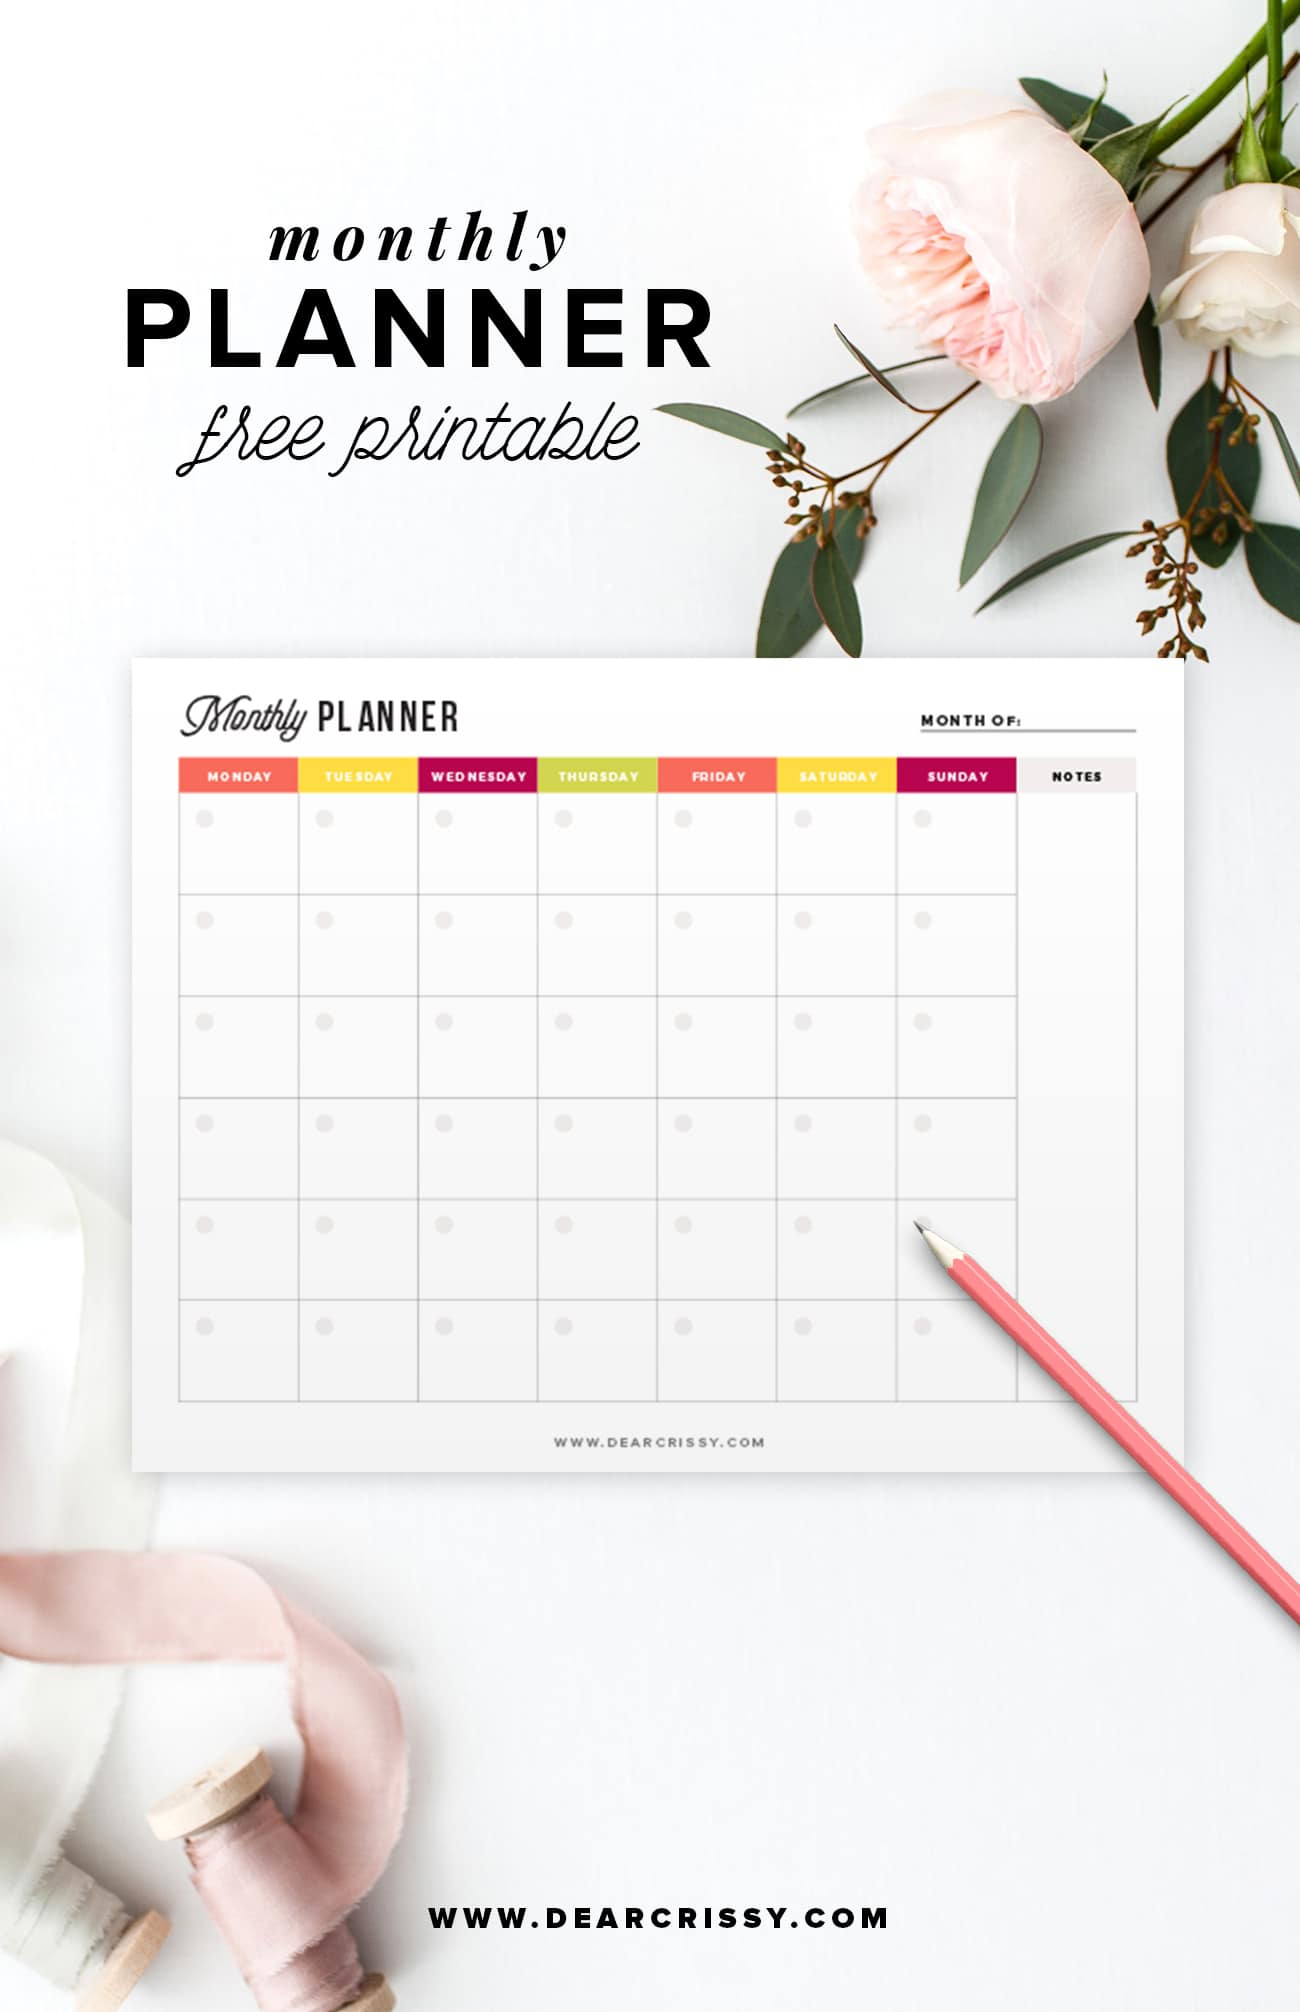 Monthly Undated Calendar Free Download - Yesmissy